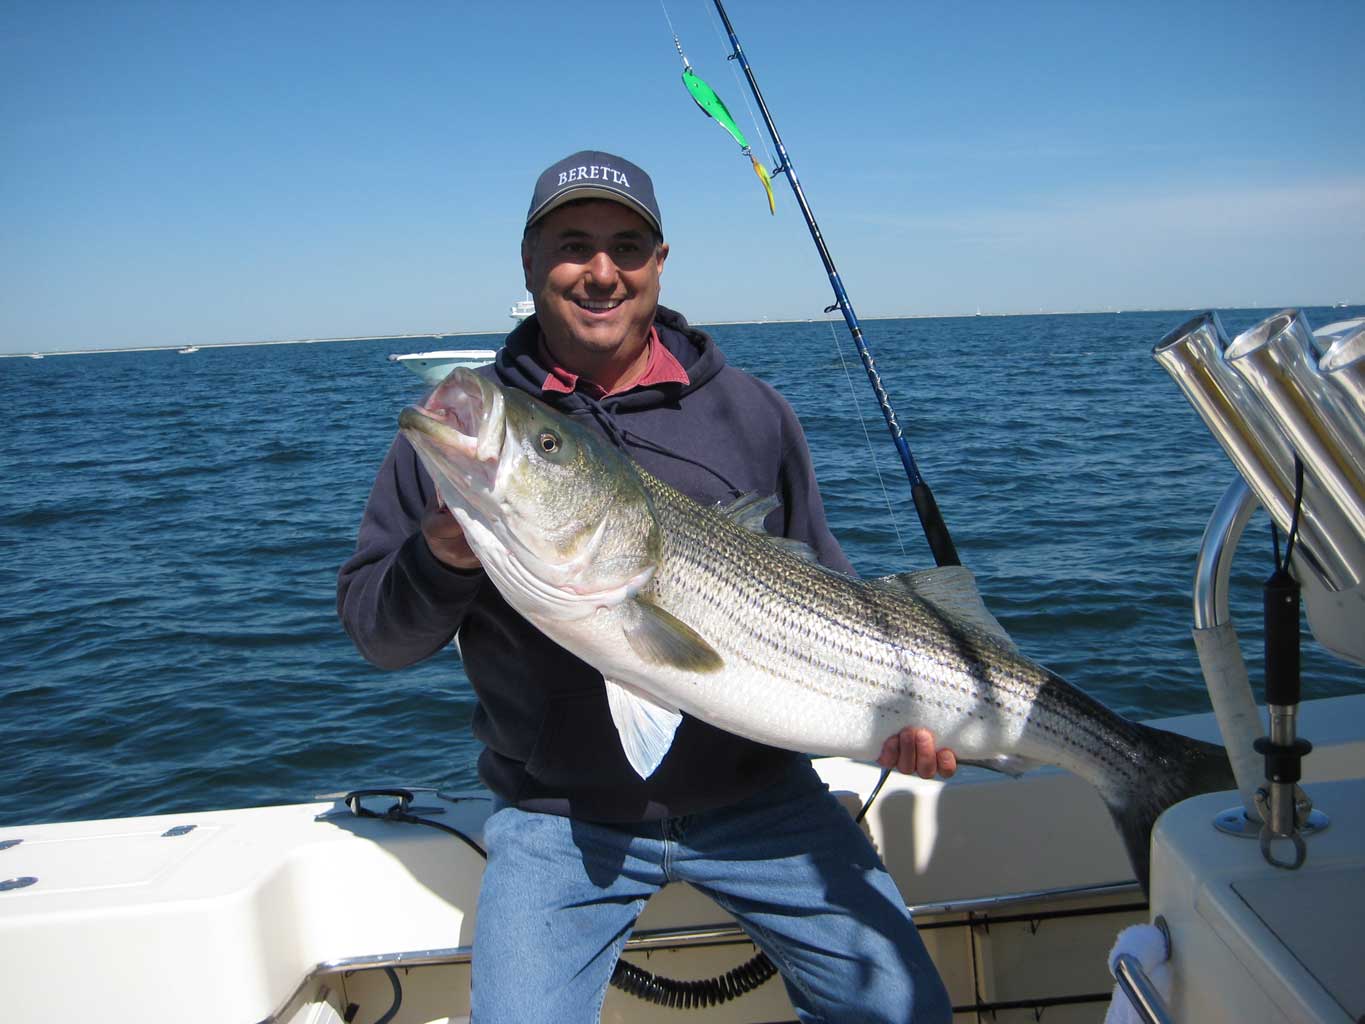 A striped bass caught by a customer on Capt. Jack Shea's Rambunctious on Barnegat Bay. (Photo: Capt. Jack Shea)